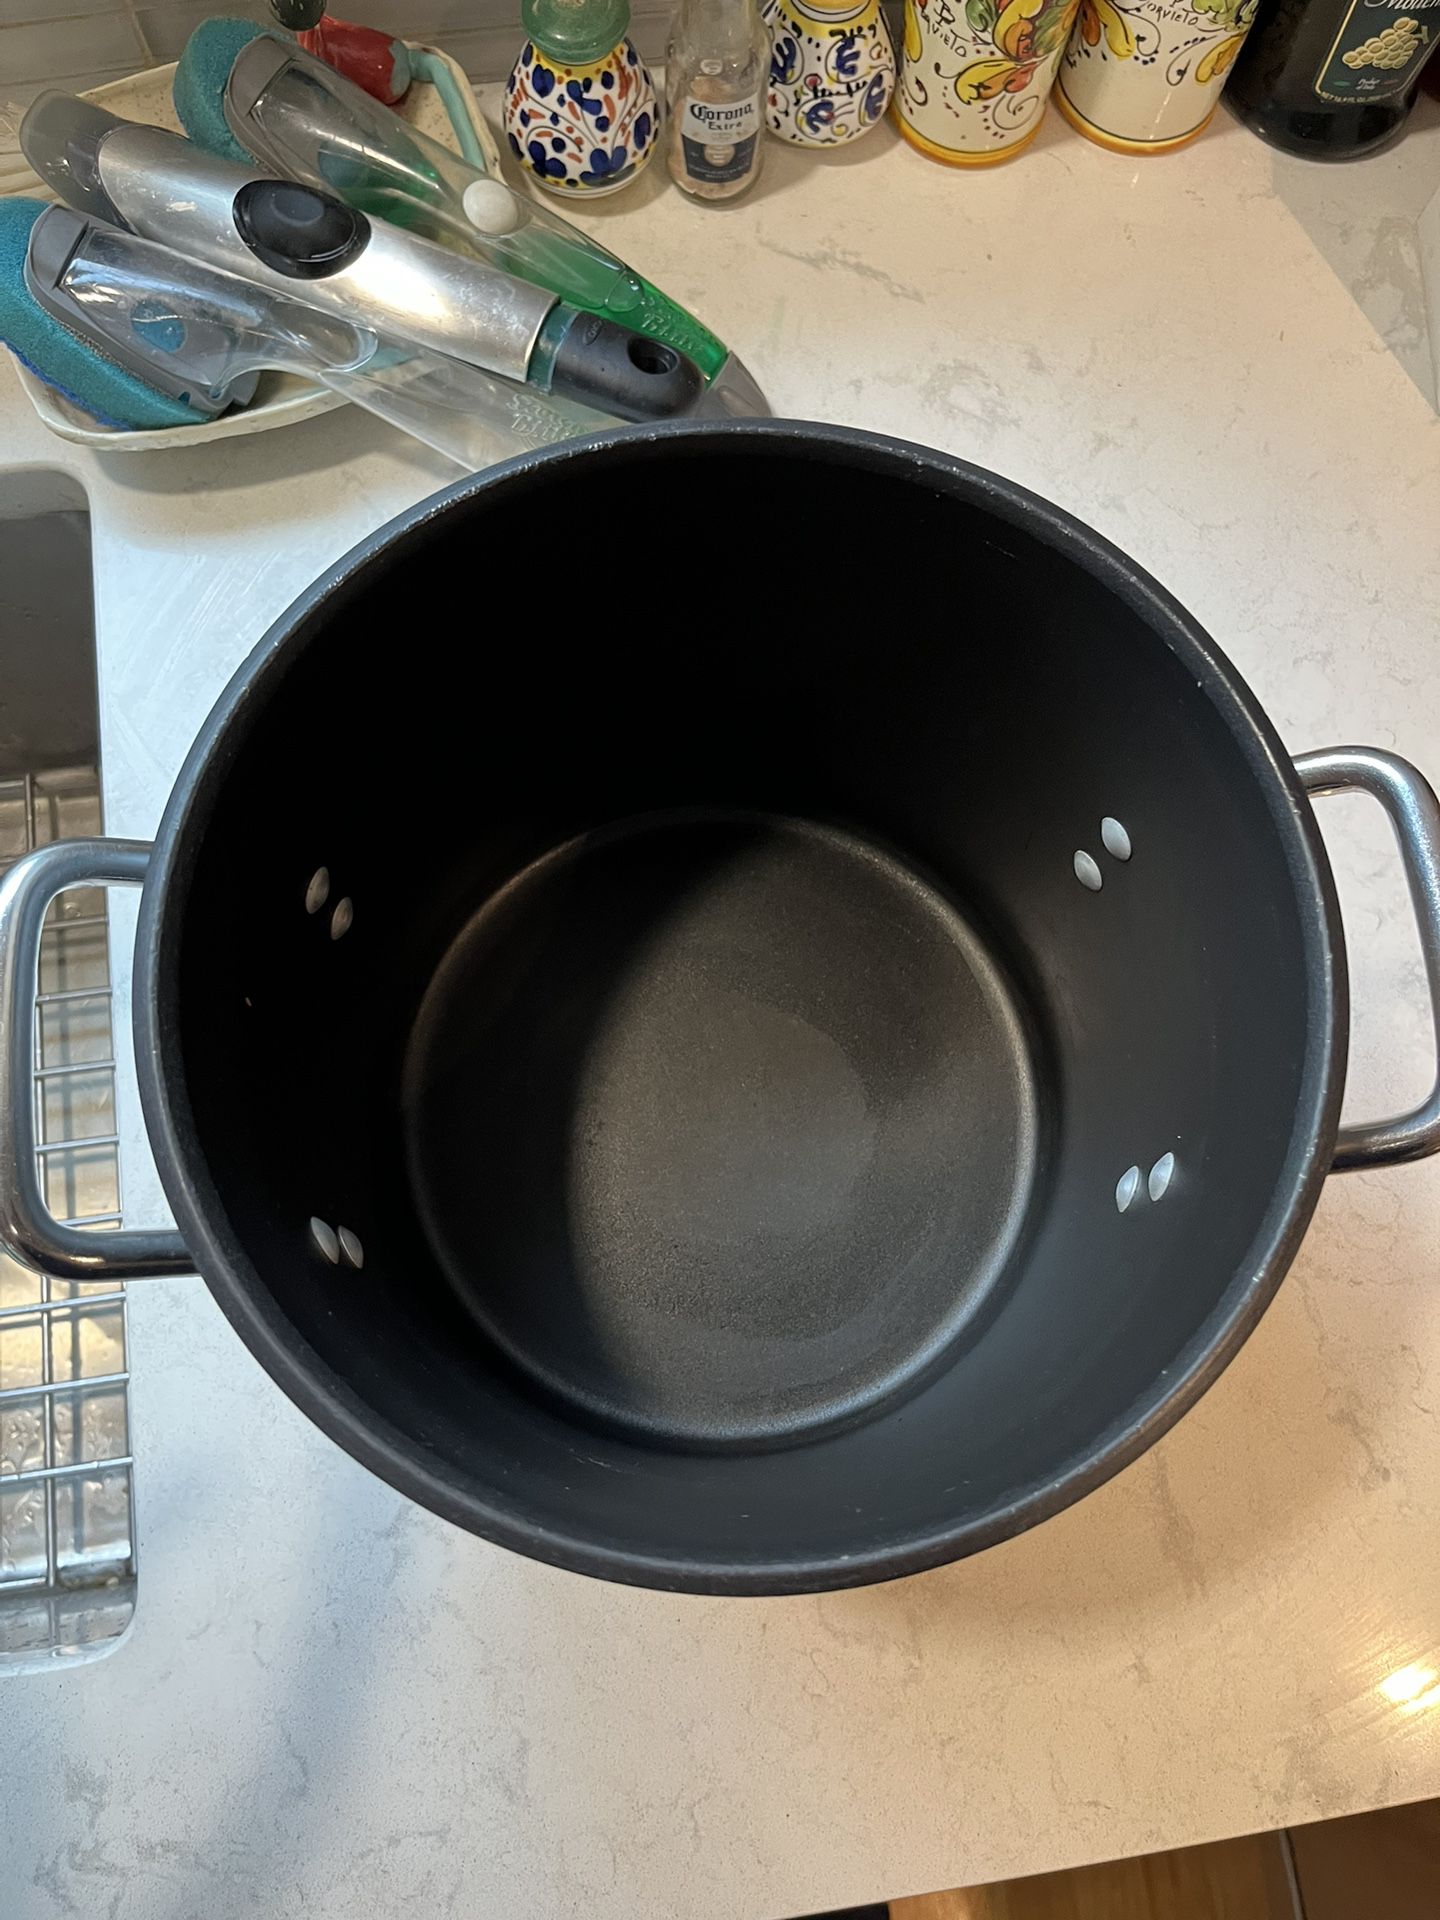 Calphalon Pan Slow Cooker Big Size for Sale in Malden, MA - OfferUp